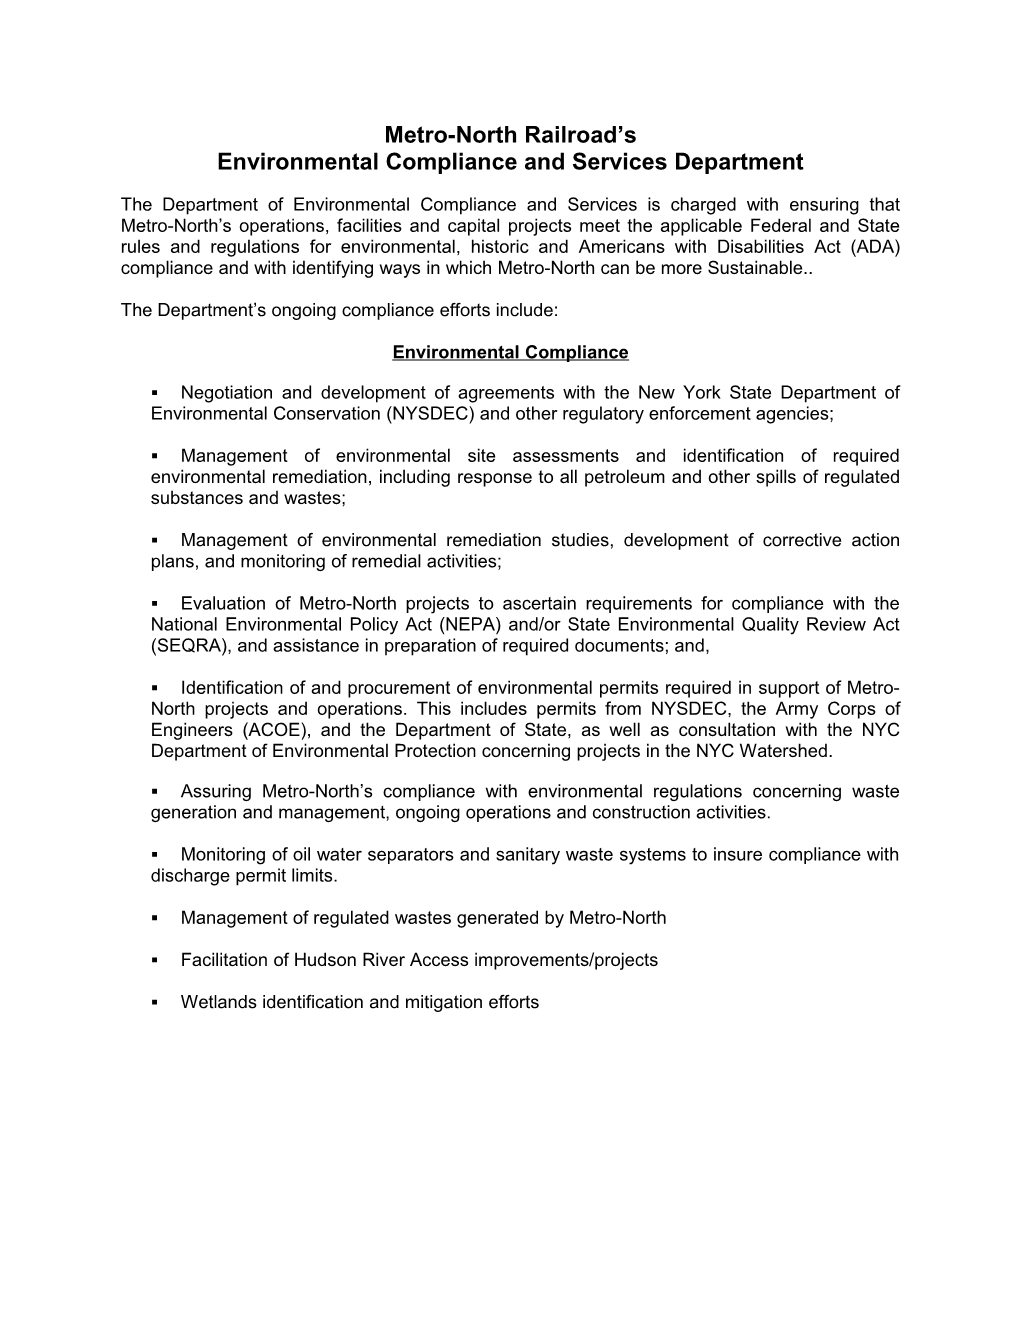 Environmental Compliance and Services Department